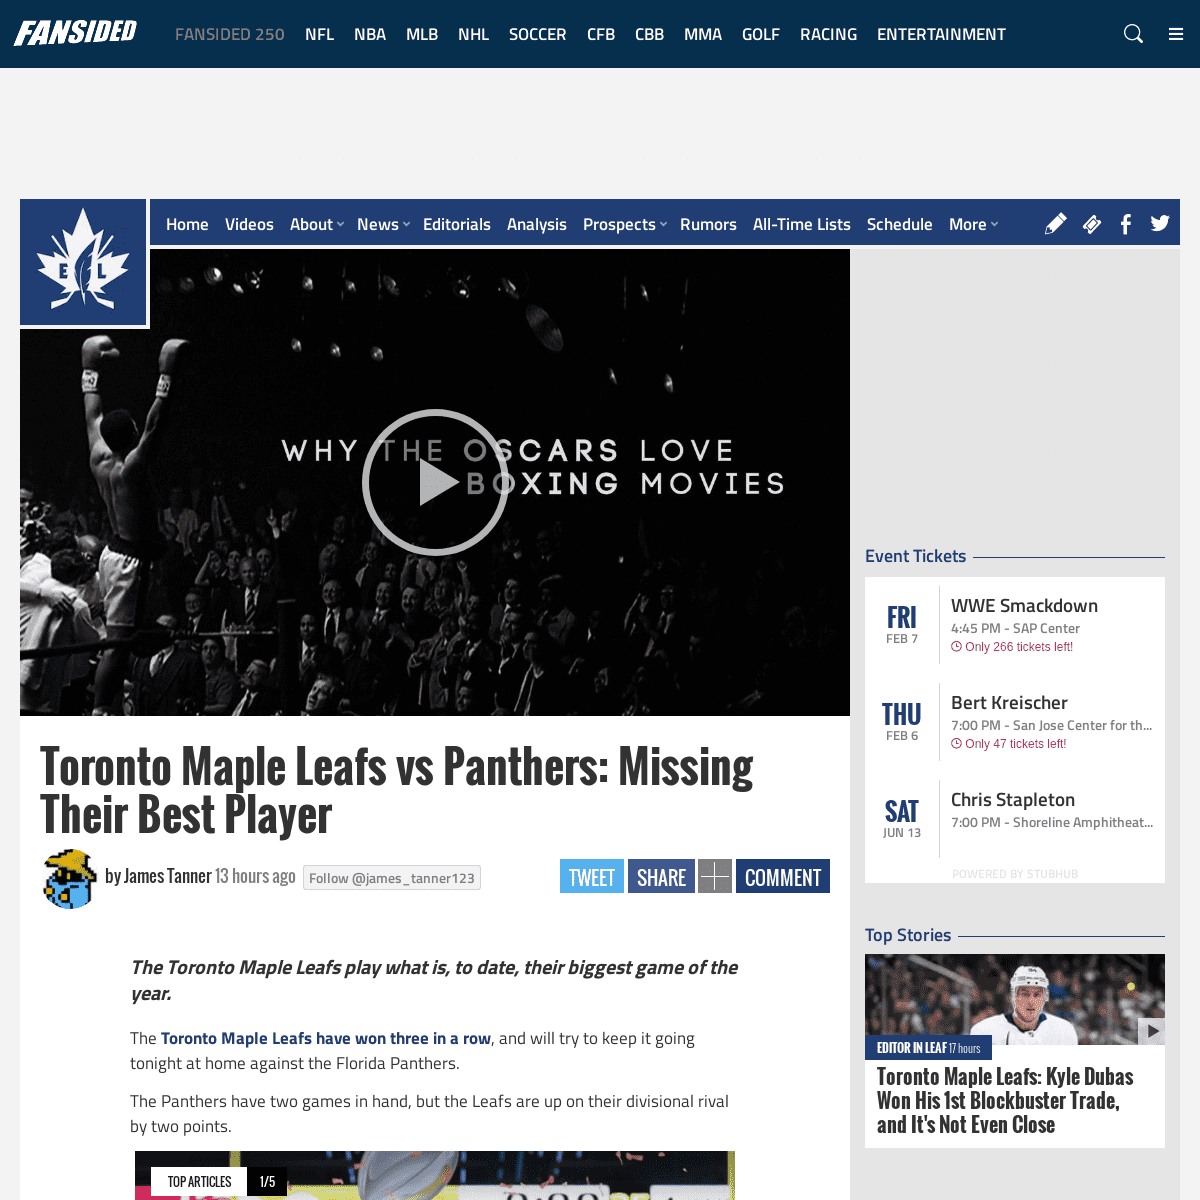 A complete backup of editorinleaf.com/2020/02/03/toronto-maple-leafs-best-player/